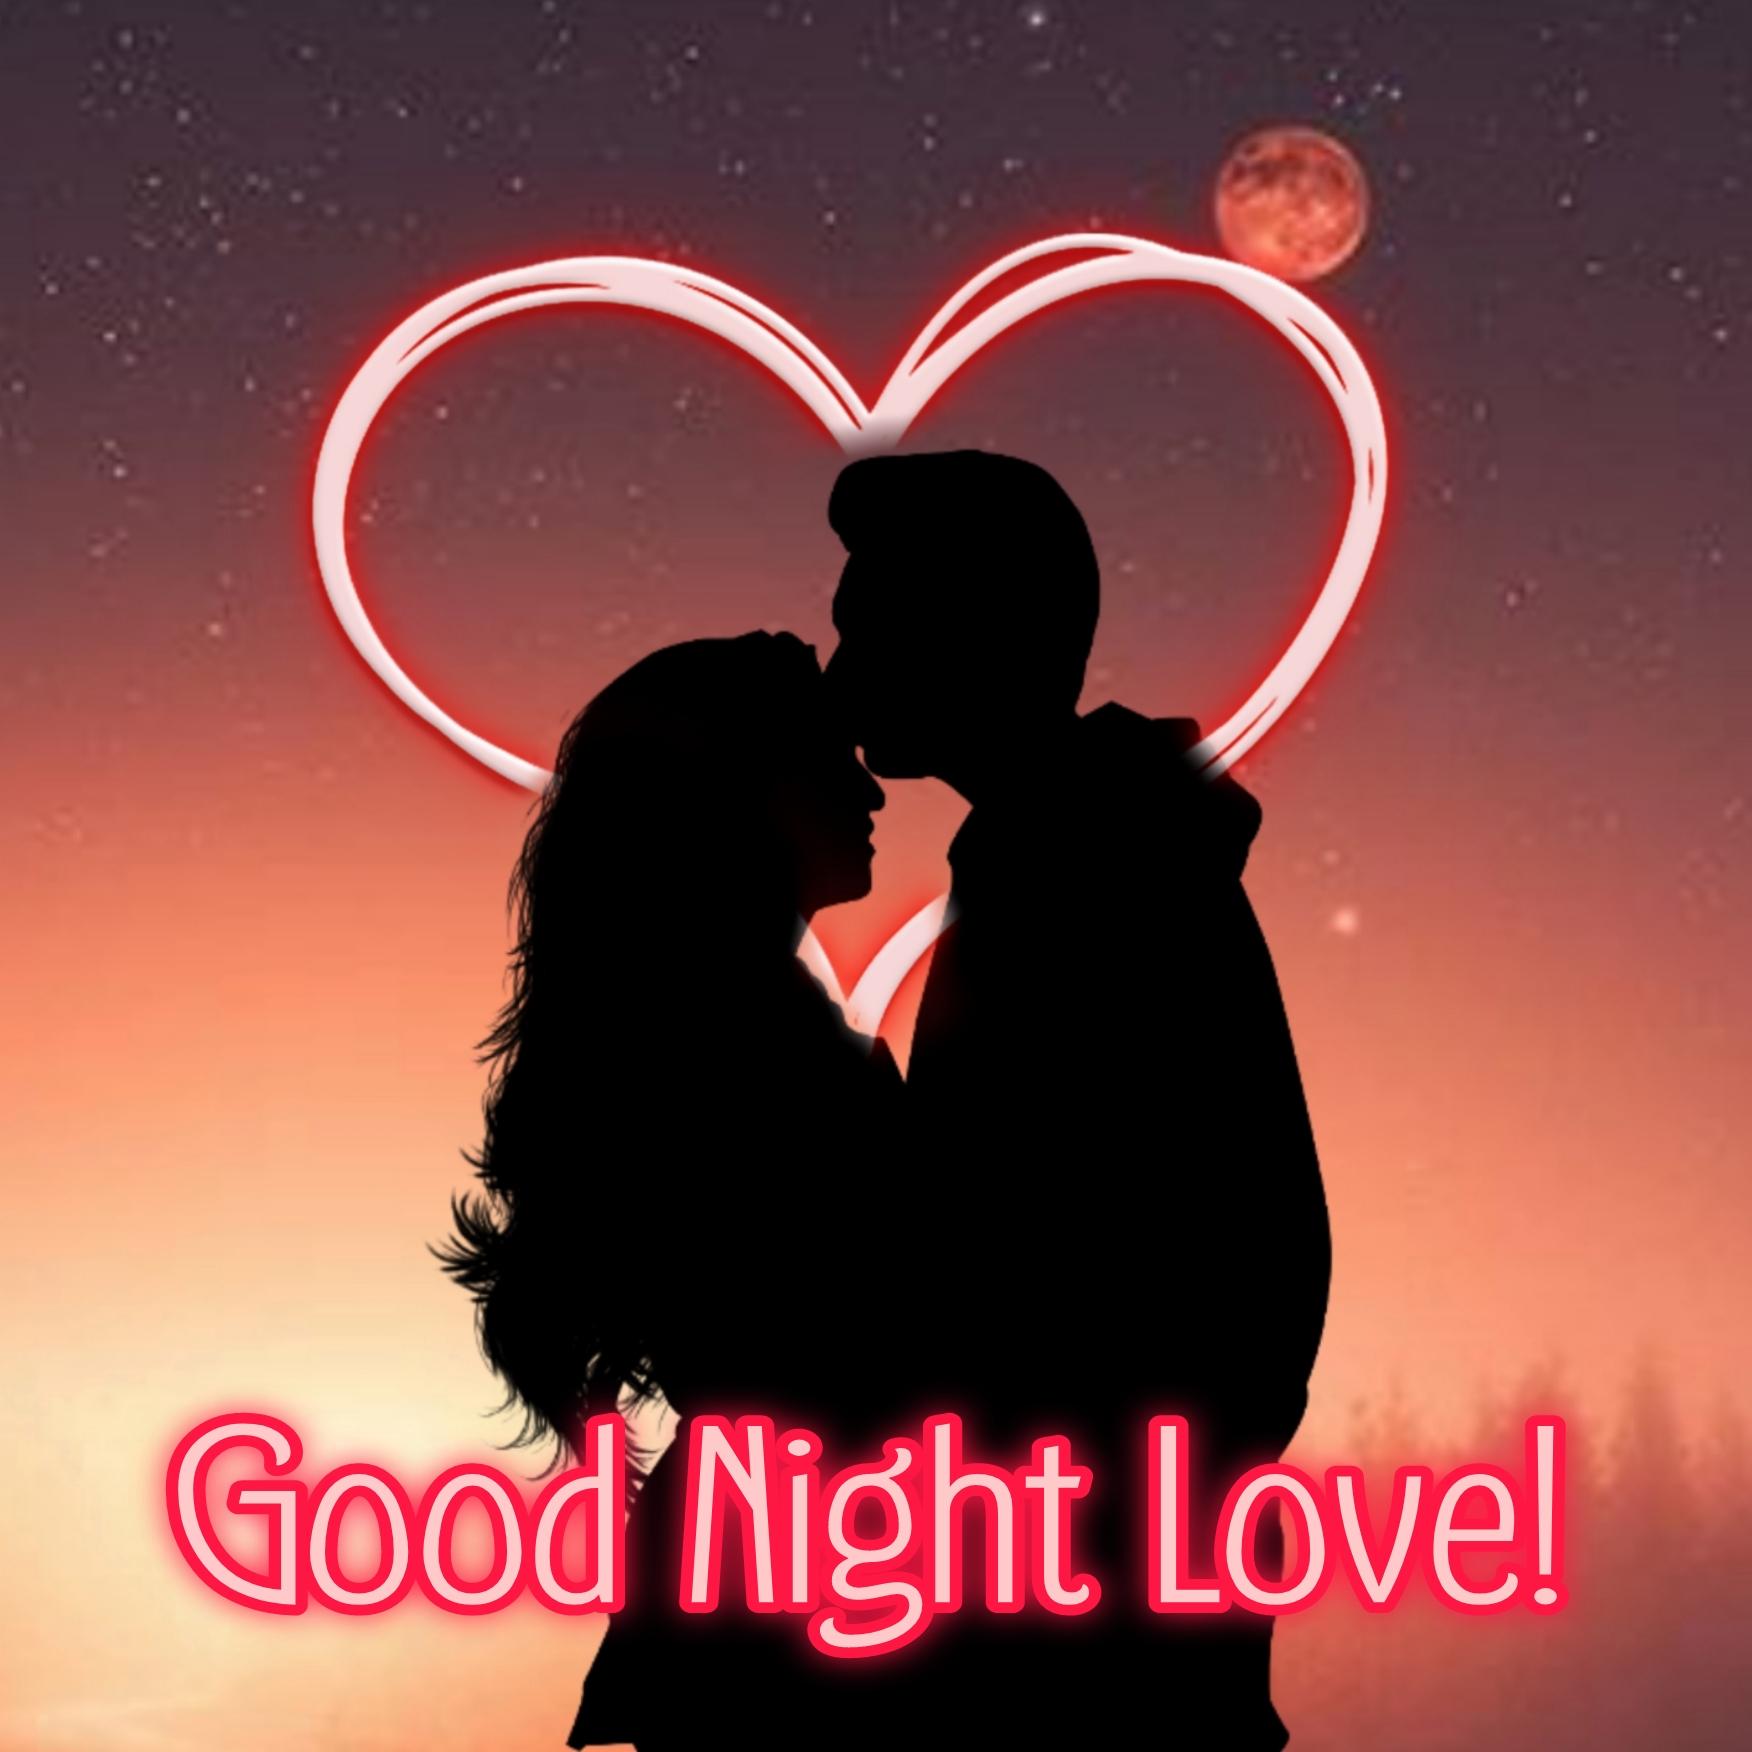 Romantic Good Night Images With Love